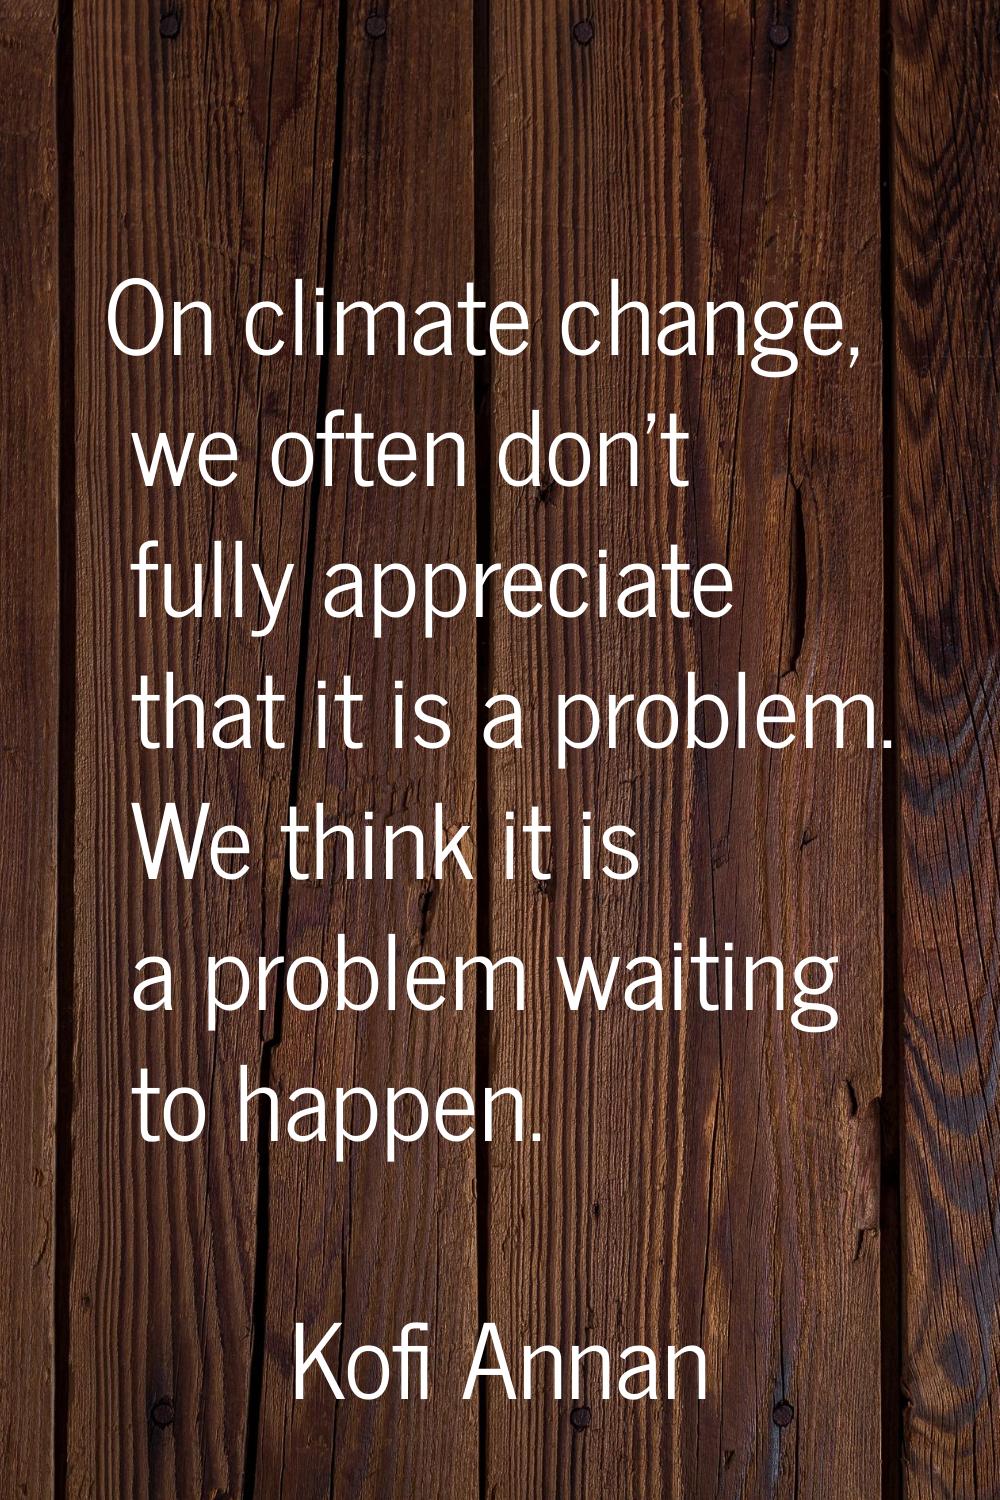 On climate change, we often don't fully appreciate that it is a problem. We think it is a problem w